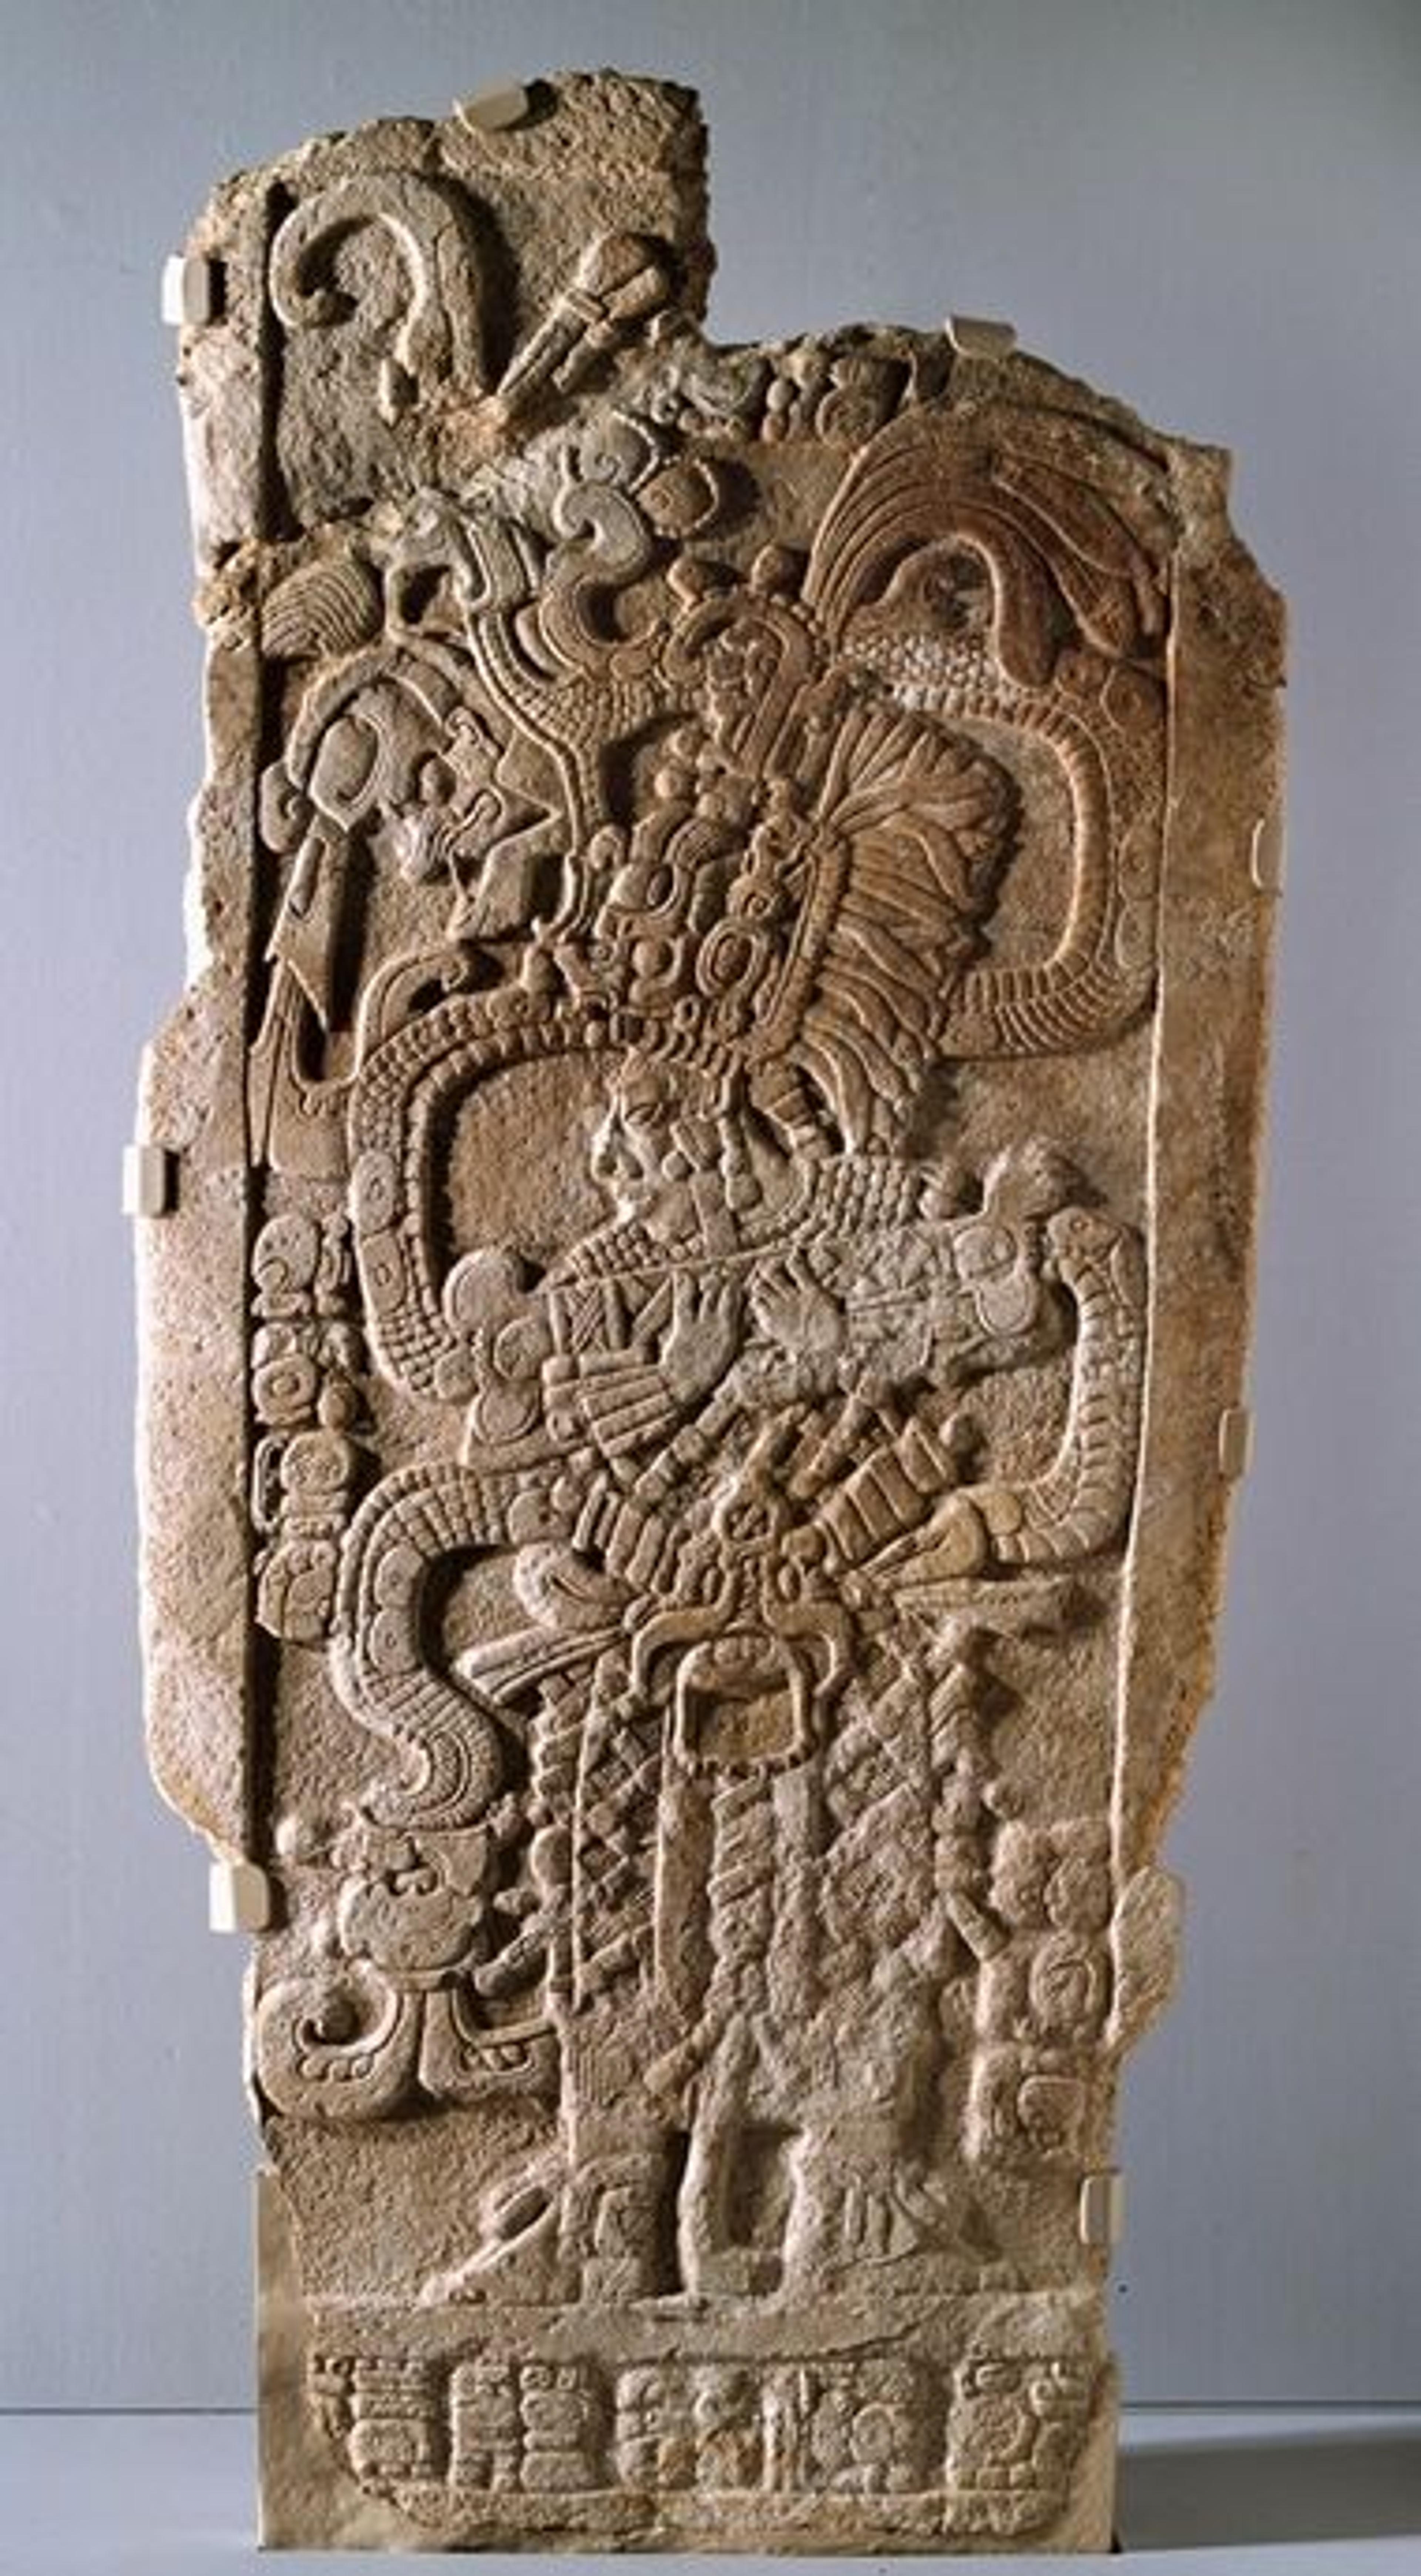 Stela of an ancient Mexican or Guatemelan queen, made of limestone and featuring ornate relief work